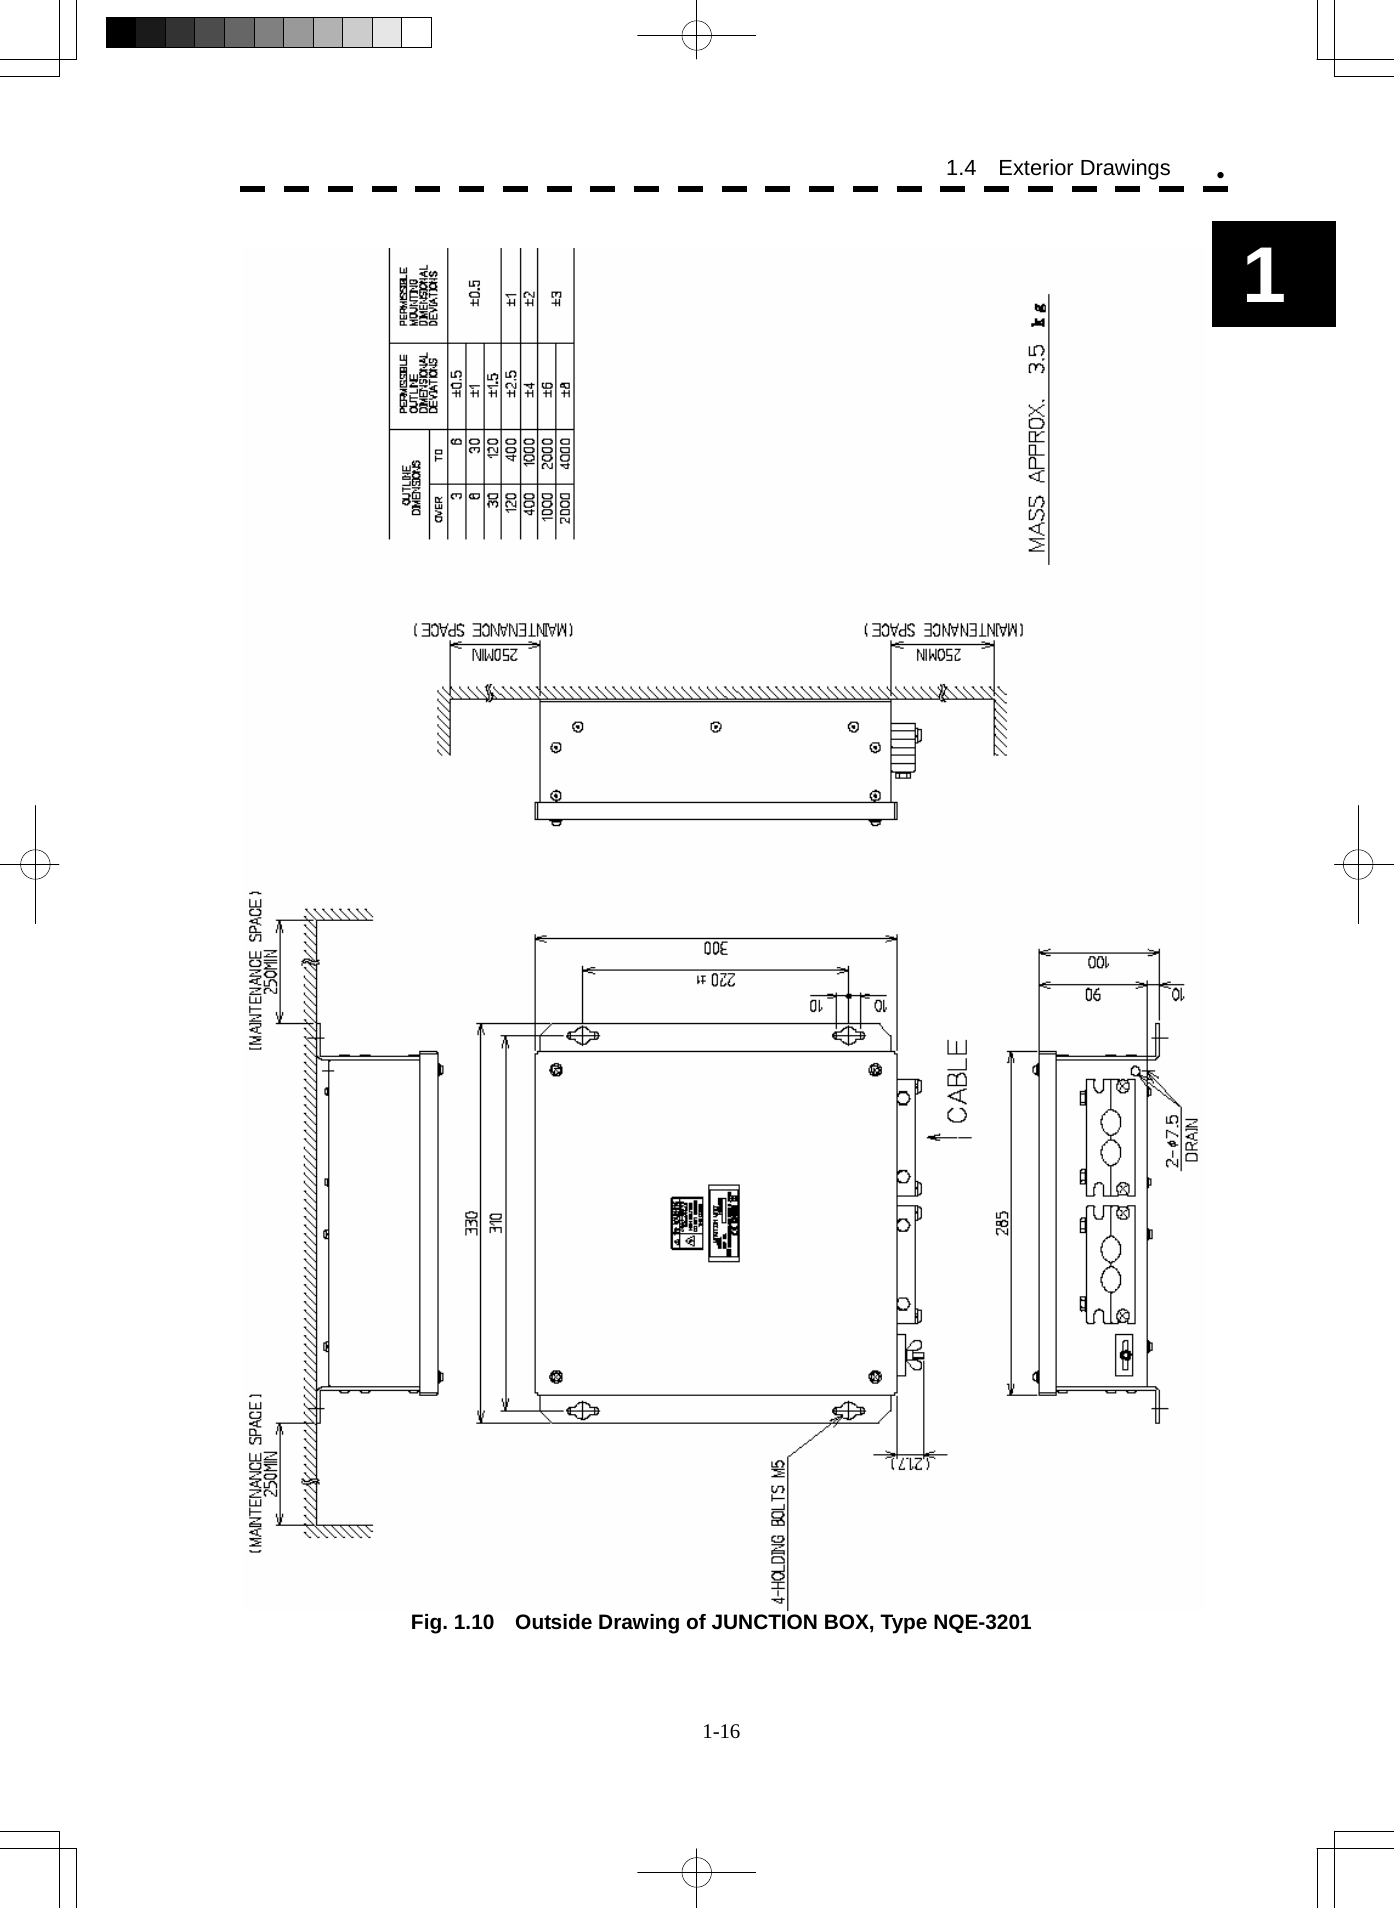  1-16 1.4  Exterior Drawings y1   Fig. 1.10    Outside Drawing of JUNCTION BOX, Type NQE-3201 